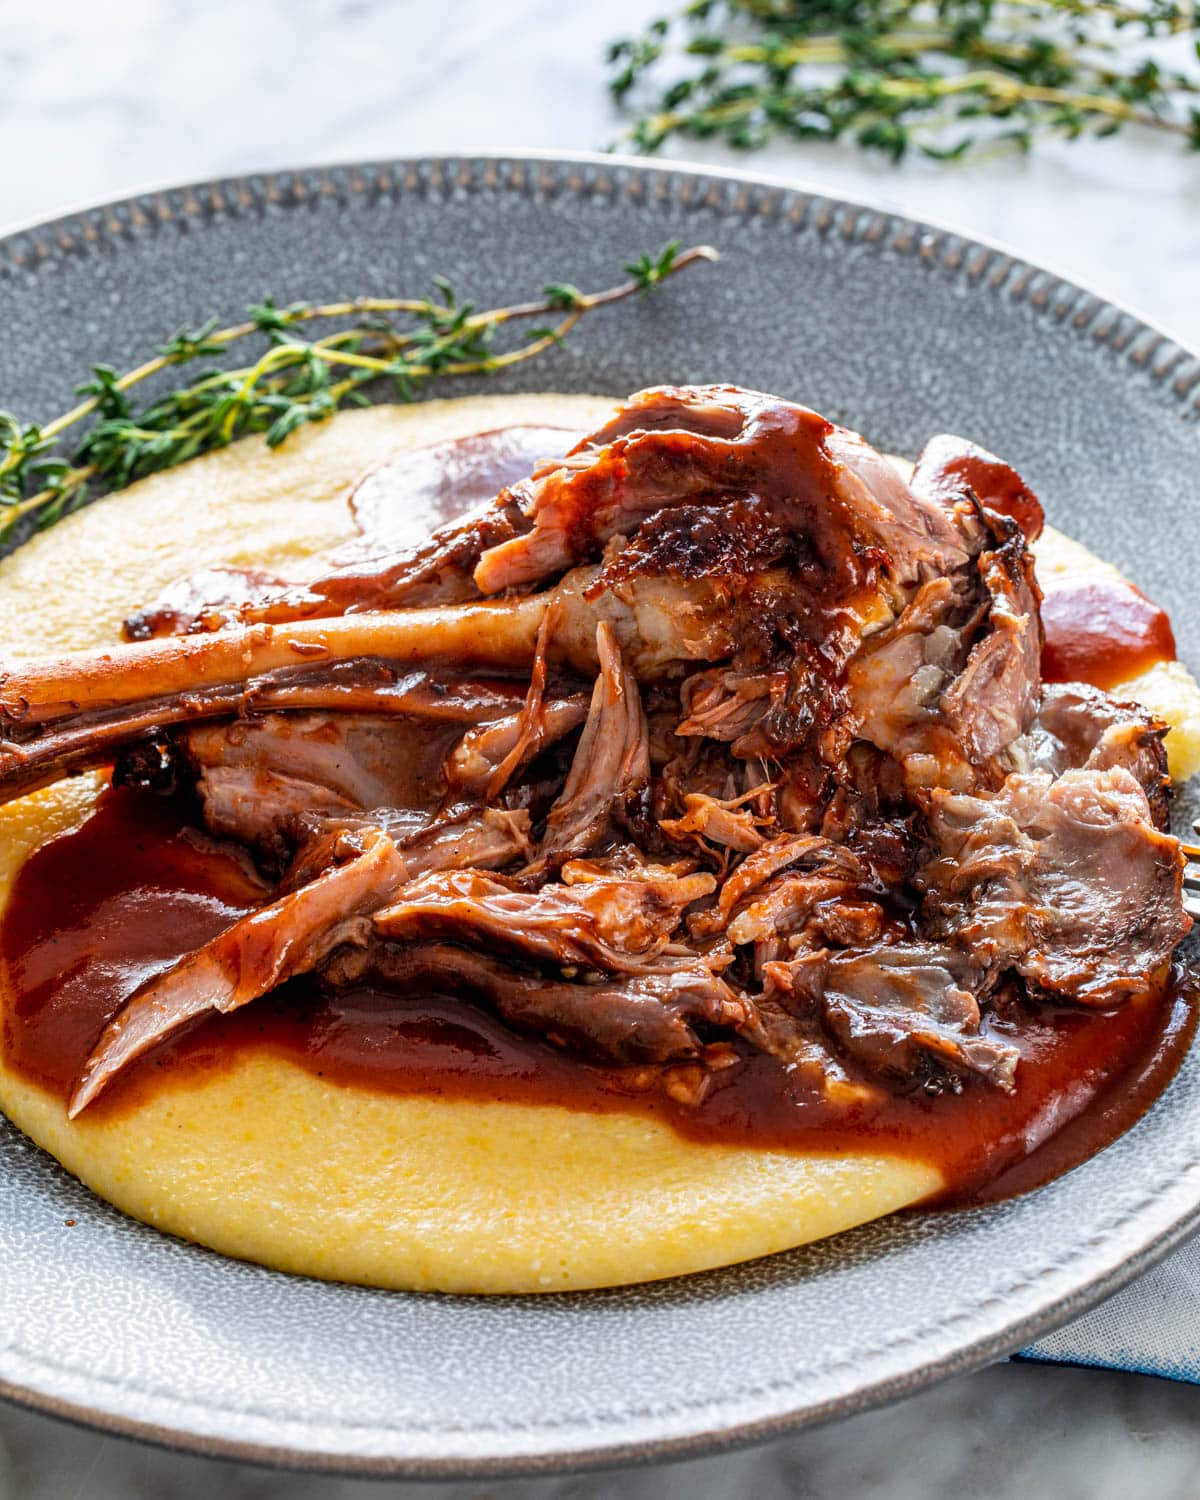 a lamb shank with sauce over creamy polenta in a grey plate